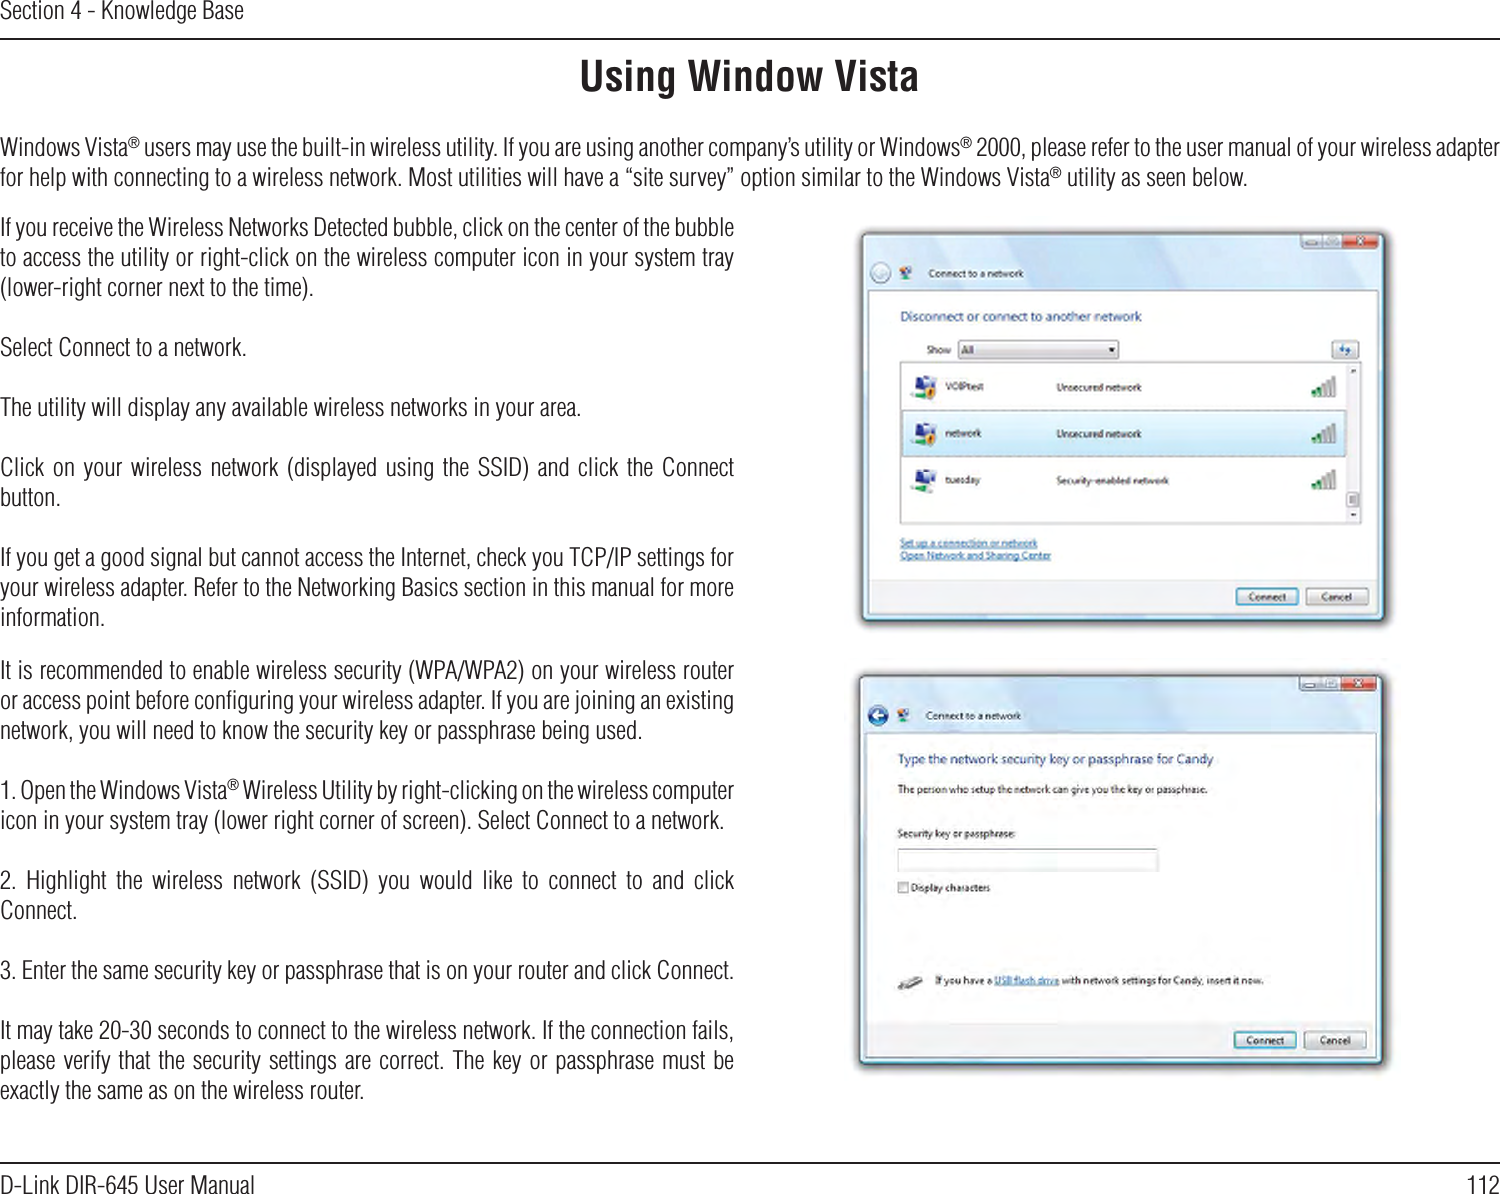 112D-Link DIR-645 User ManualSection 4 - Knowledge BaseUsing Window VistaWindows Vista® users may use the built-in wireless utility. If you are using another company’s utility or Windows® 2000, please refer to the user manual of your wireless adapter for help with connecting to a wireless network. Most utilities will have a “site survey” option similar to the Windows Vista® utility as seen below.If you receive the Wireless Networks Detected bubble, click on the center of the bubble to access the utility or right-click on the wireless computer icon in your system tray (lower-right corner next to the time).Select Connect to a network.The utility will display any available wireless networks in your area.Click on  your  wireless  network  (displayed  using the  SSID)  and  click  the  Connect button.If you get a good signal but cannot access the Internet, check you TCP/IP settings for your wireless adapter. Refer to the Networking Basics section in this manual for more information.It is recommended to enable wireless security (WPA/WPA2) on your wireless router or access point before conﬁguring your wireless adapter. If you are joining an existing network, you will need to know the security key or passphrase being used.1. Open the Windows Vista® Wireless Utility by right-clicking on the wireless computer icon in your system tray (lower right corner of screen). Select Connect to a network.2.  Highlight  the  wireless  network  (SSID)  you  would  like  to  connect  to  and  click Connect.3. Enter the same security key or passphrase that is on your router and click Connect.It may take 20-30 seconds to connect to the wireless network. If the connection fails, please verify that the security settings are correct. The key or passphrase must be exactly the same as on the wireless router.